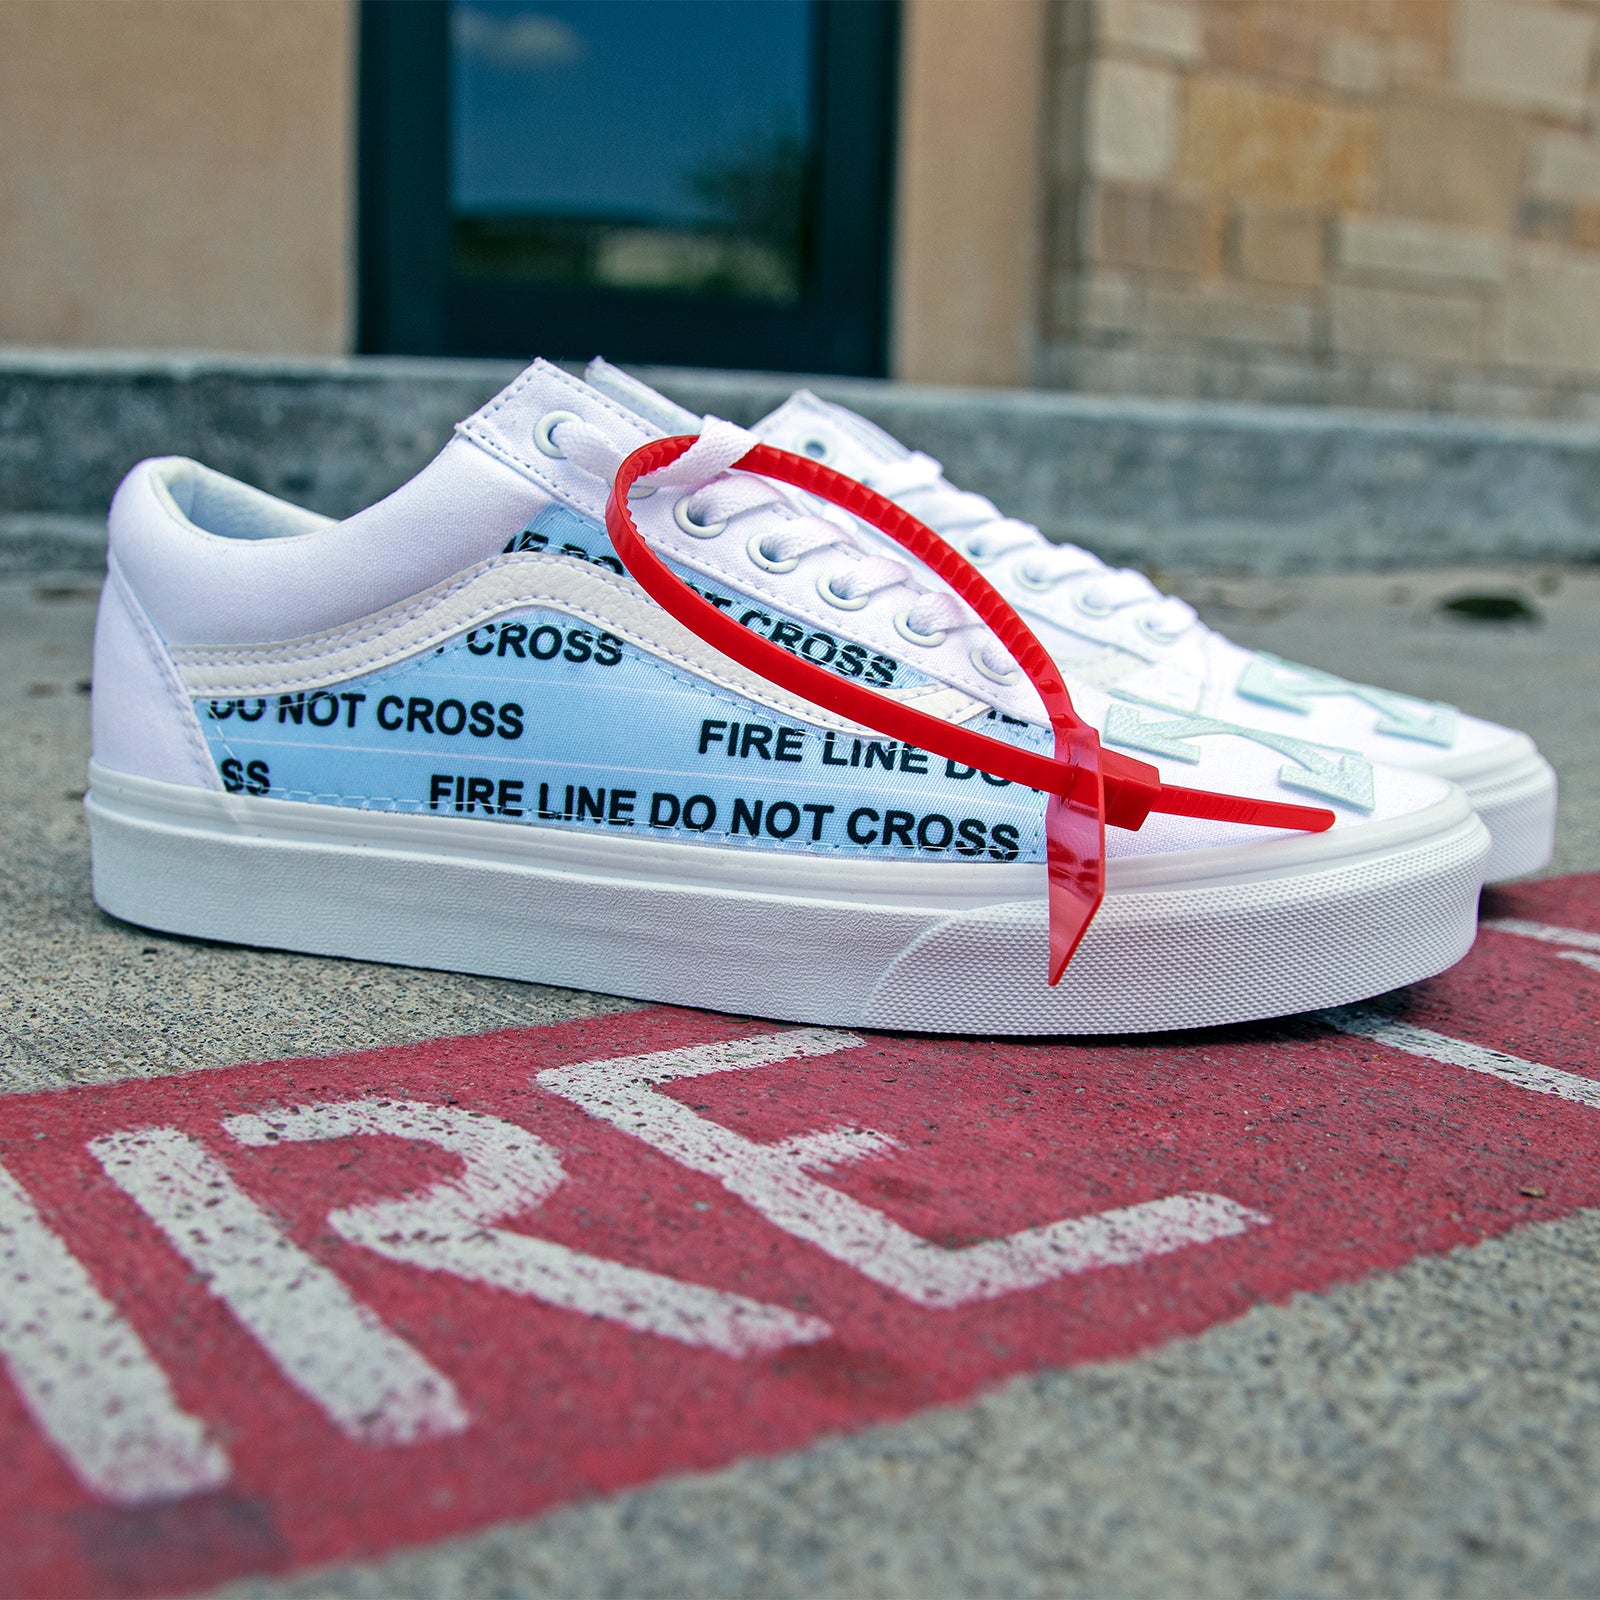 Custom Vans Shoes  Add Your Text To Your Vans Shoes